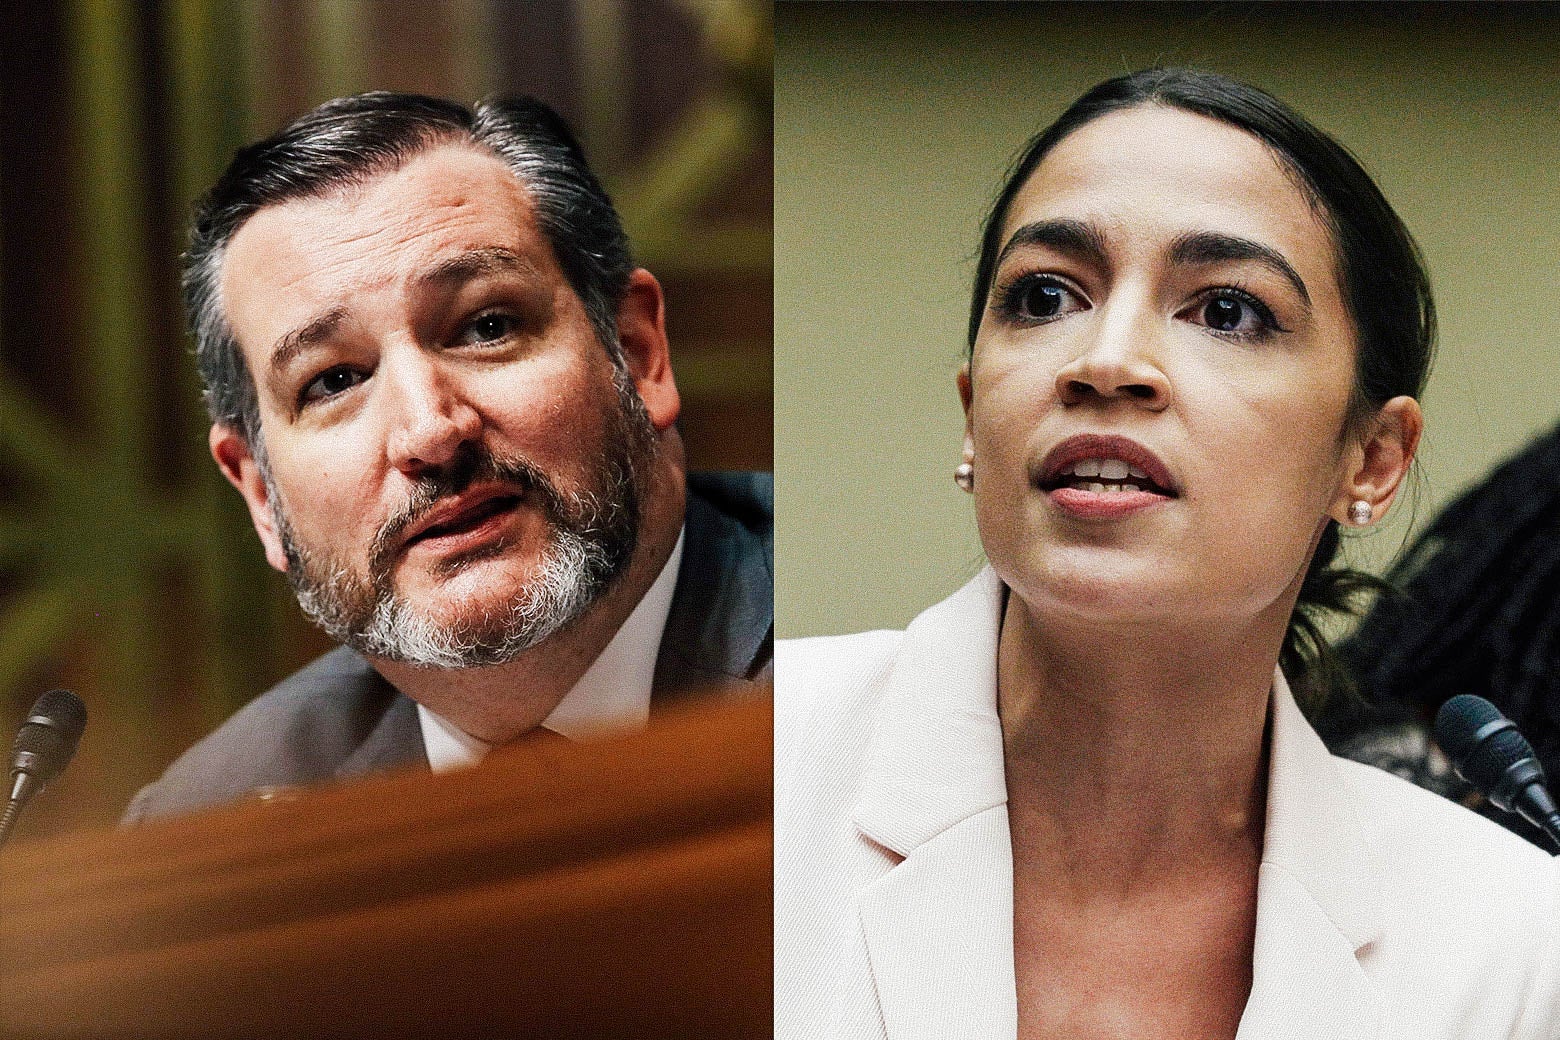 A diptych: On one side, Ted Cruz, with a beard, speaks into a microphone. On the other, Alexandria Ocasio-Cortez speaks into a microphone.